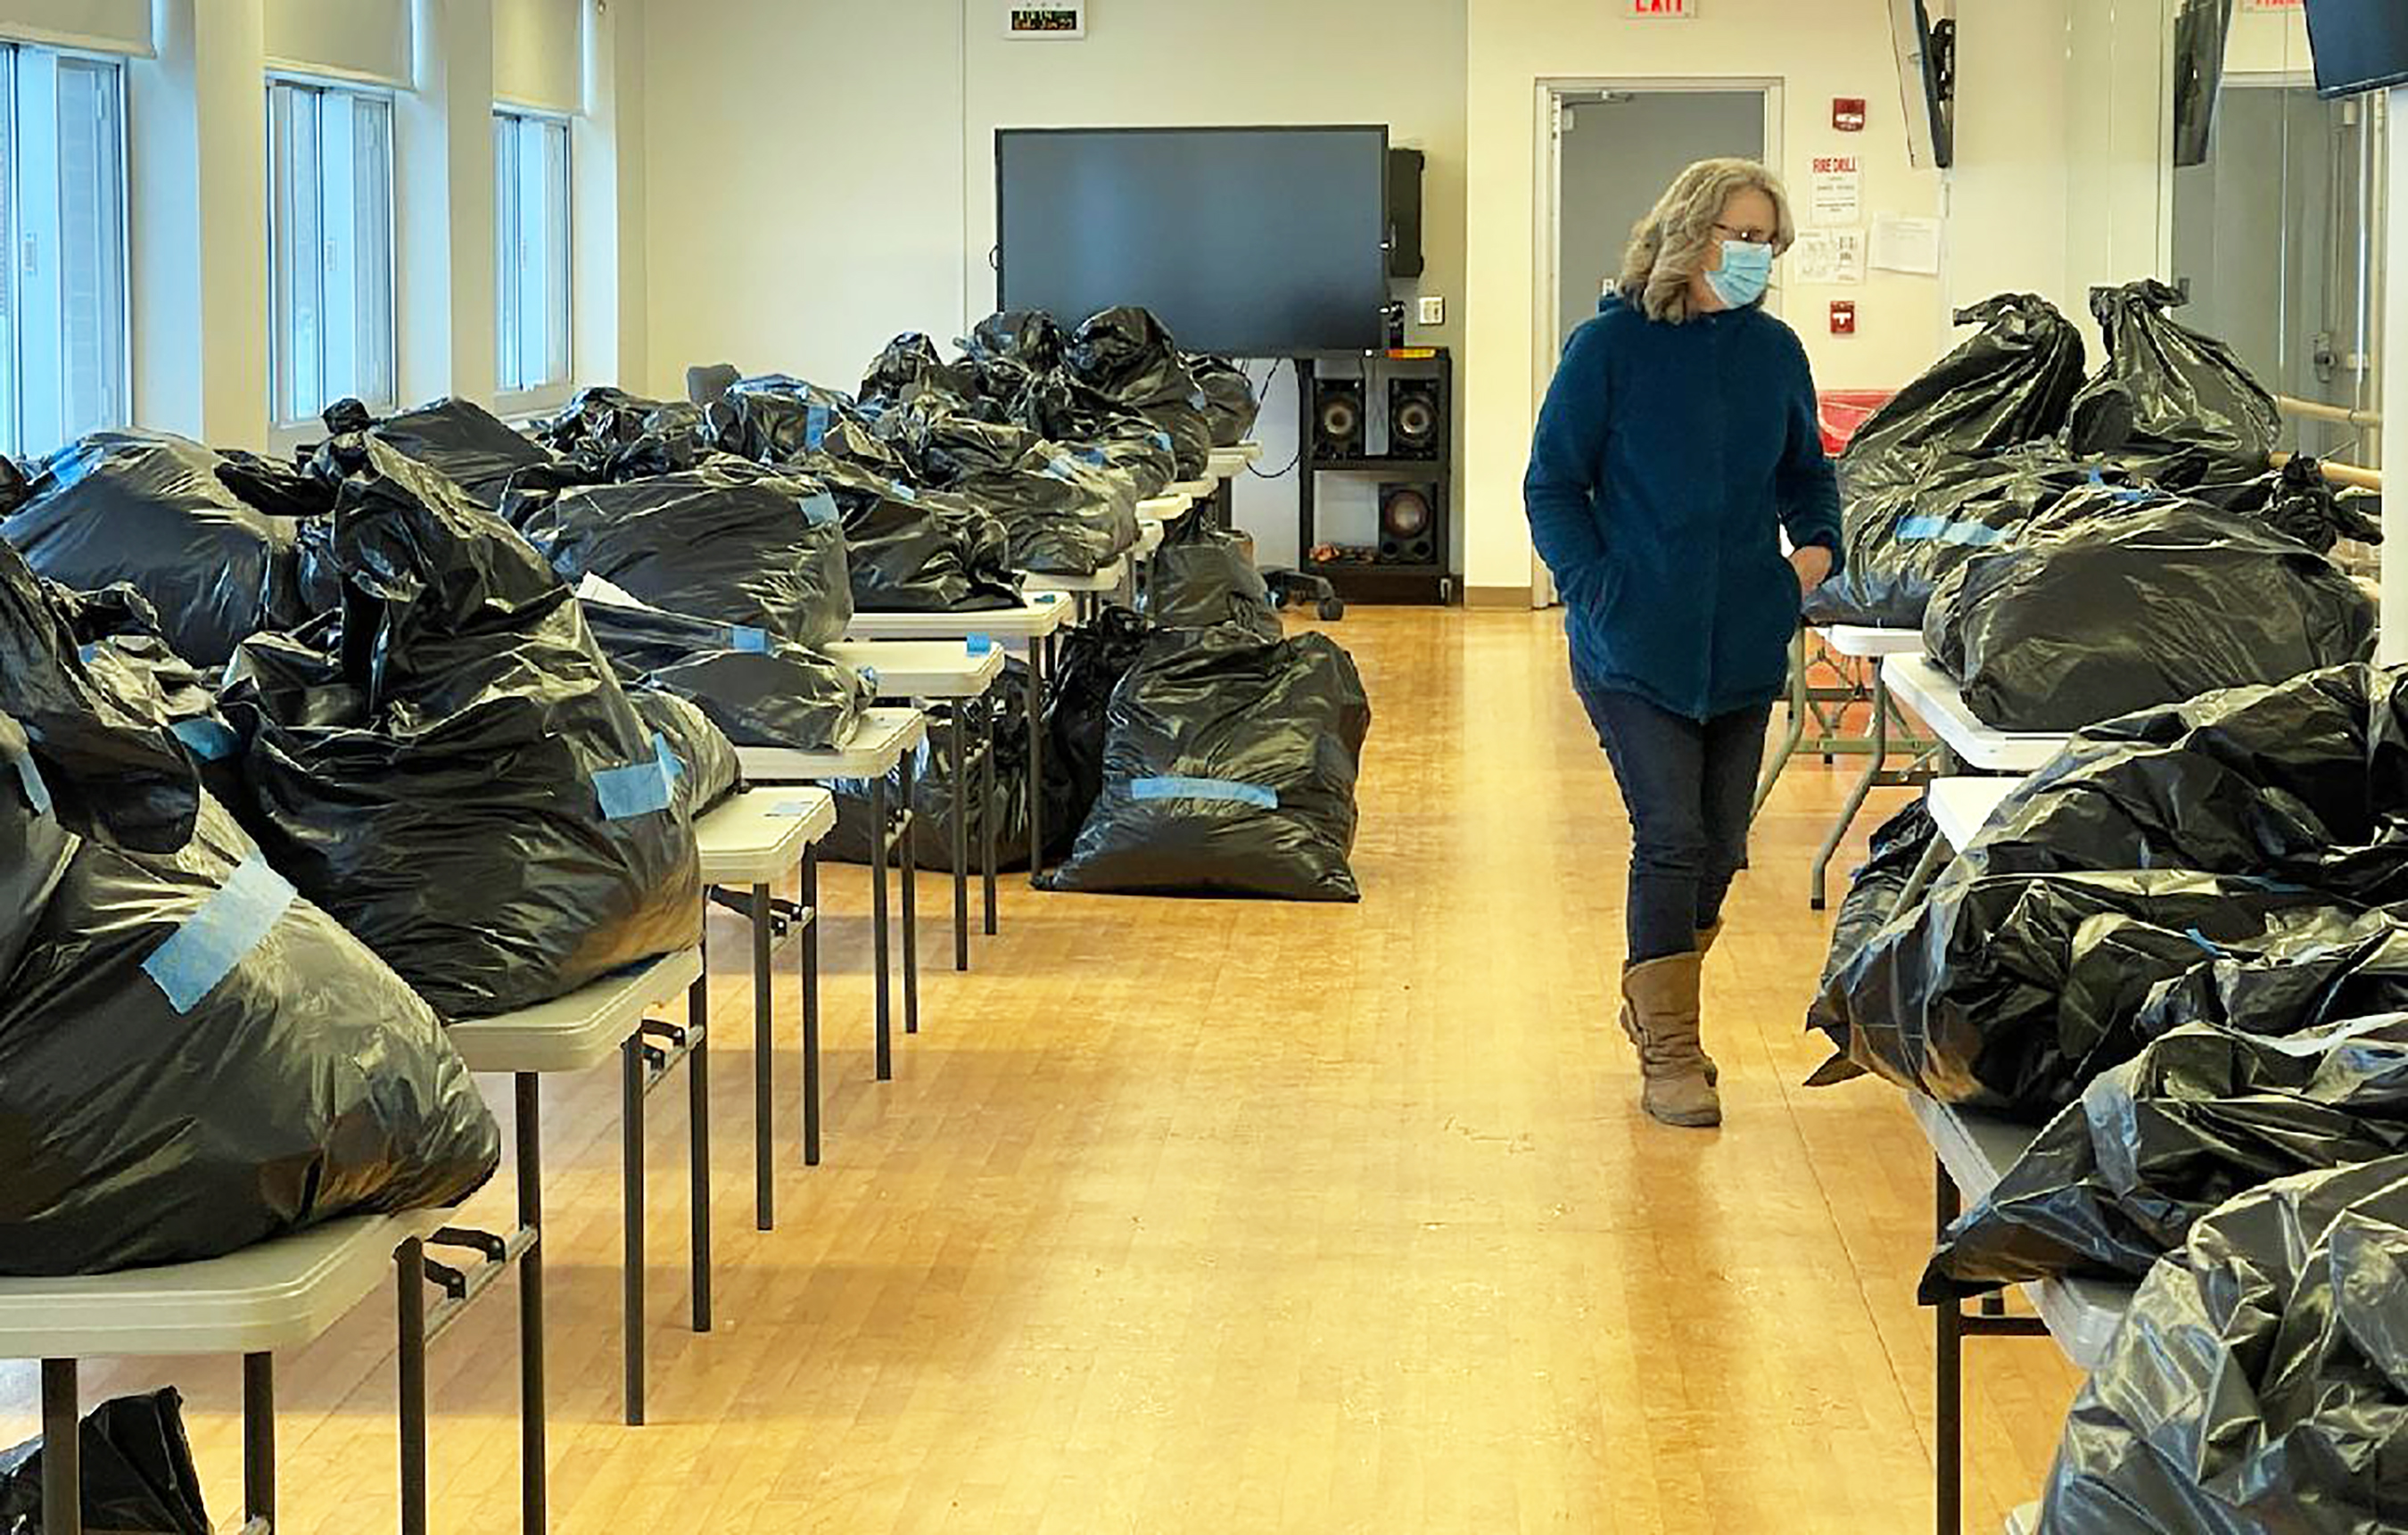 A volunteer walks past tables of clothing donations